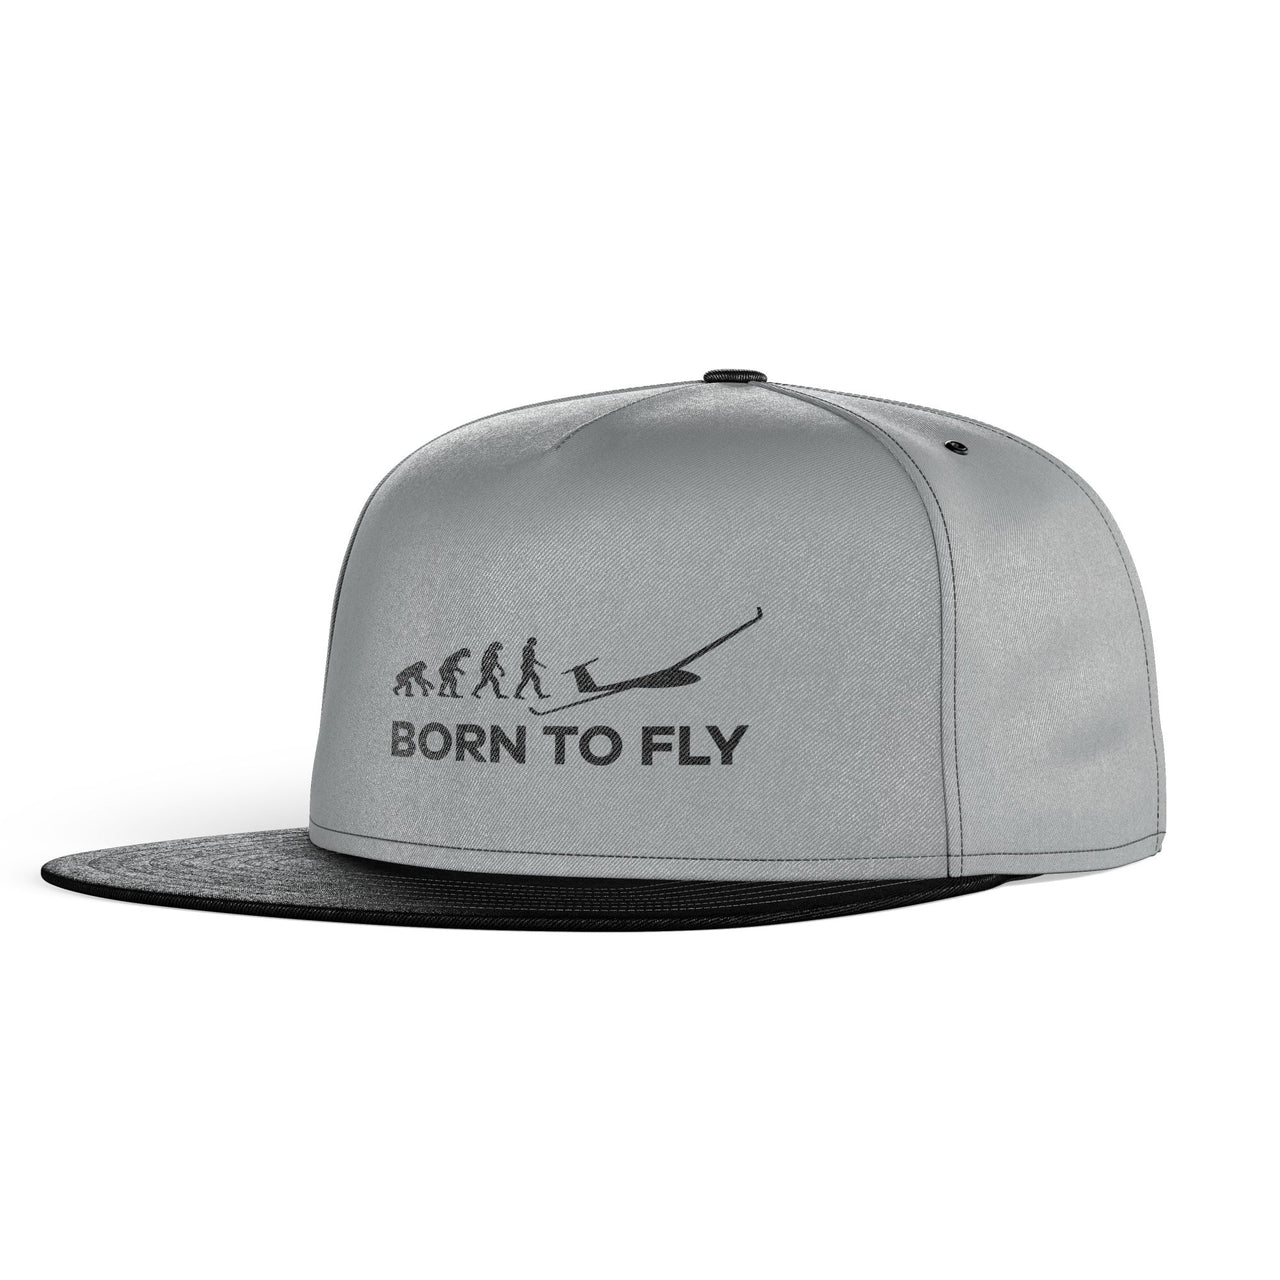 Born To Fly Glider Designed Snapback Caps & Hats